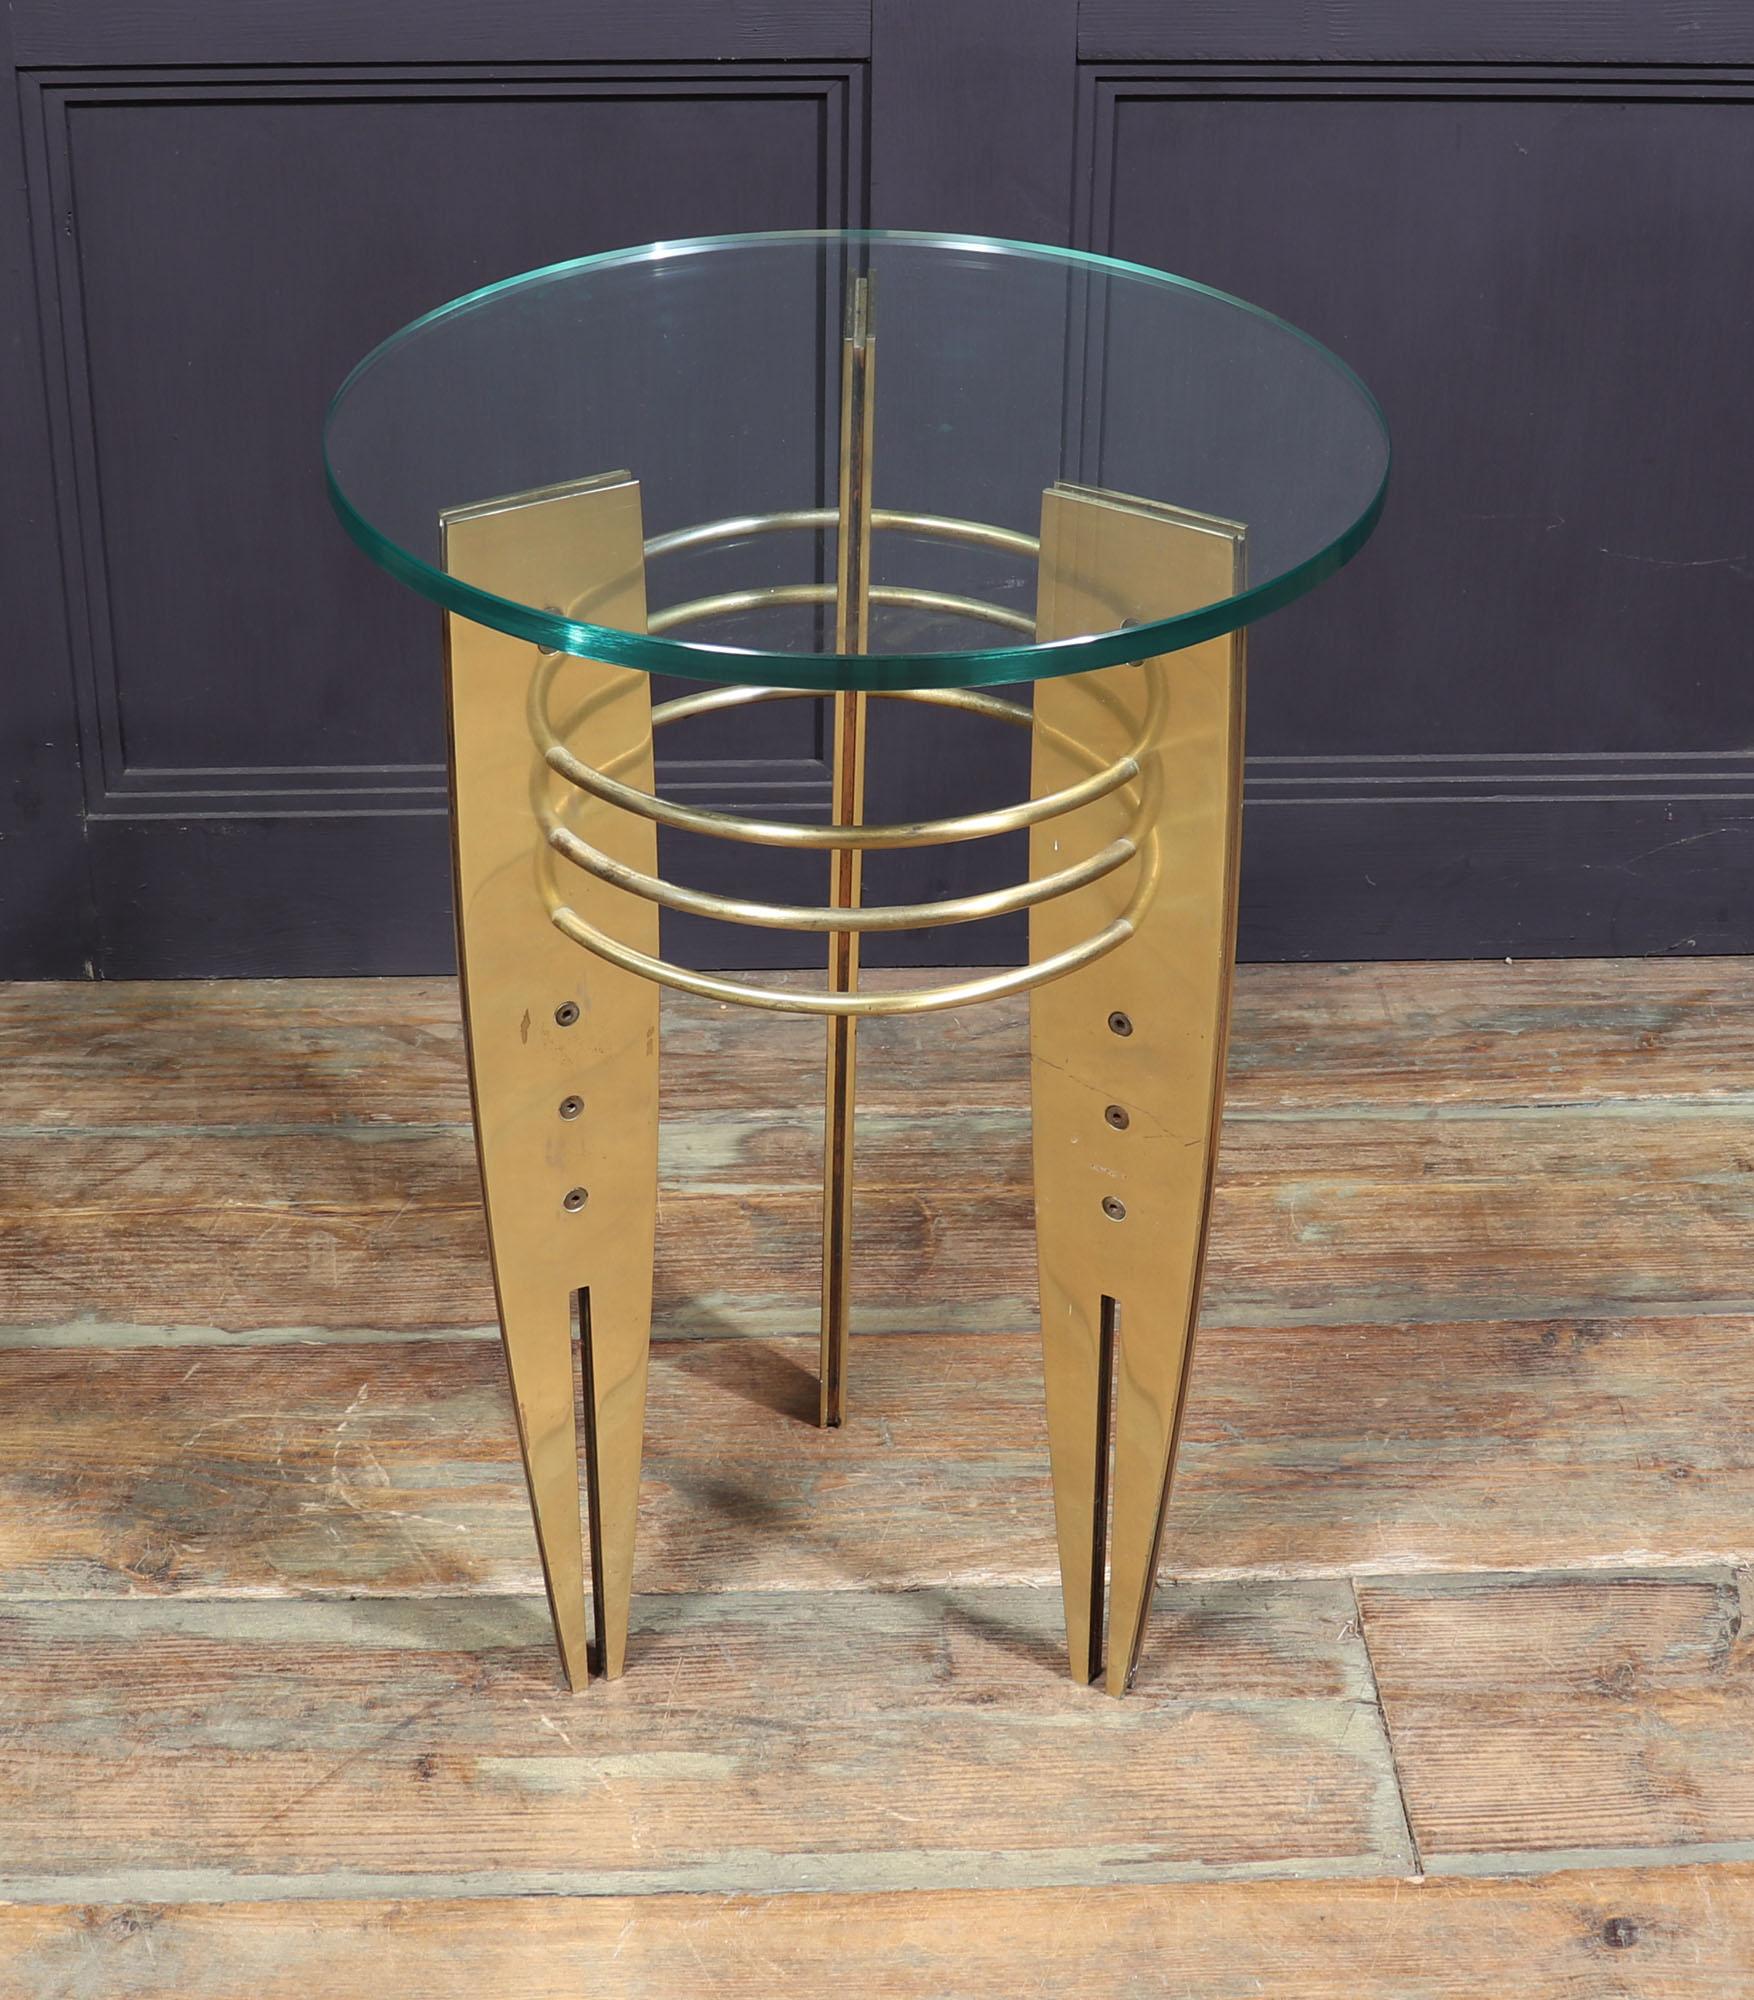 MODERNIST ROCKET TABLE.
A Modernist design side table in solid brass dating to around 1970, it has a new 15mm glass top and with a few light marks other wise in very good condition throughout

If you looking for something unique and out of the